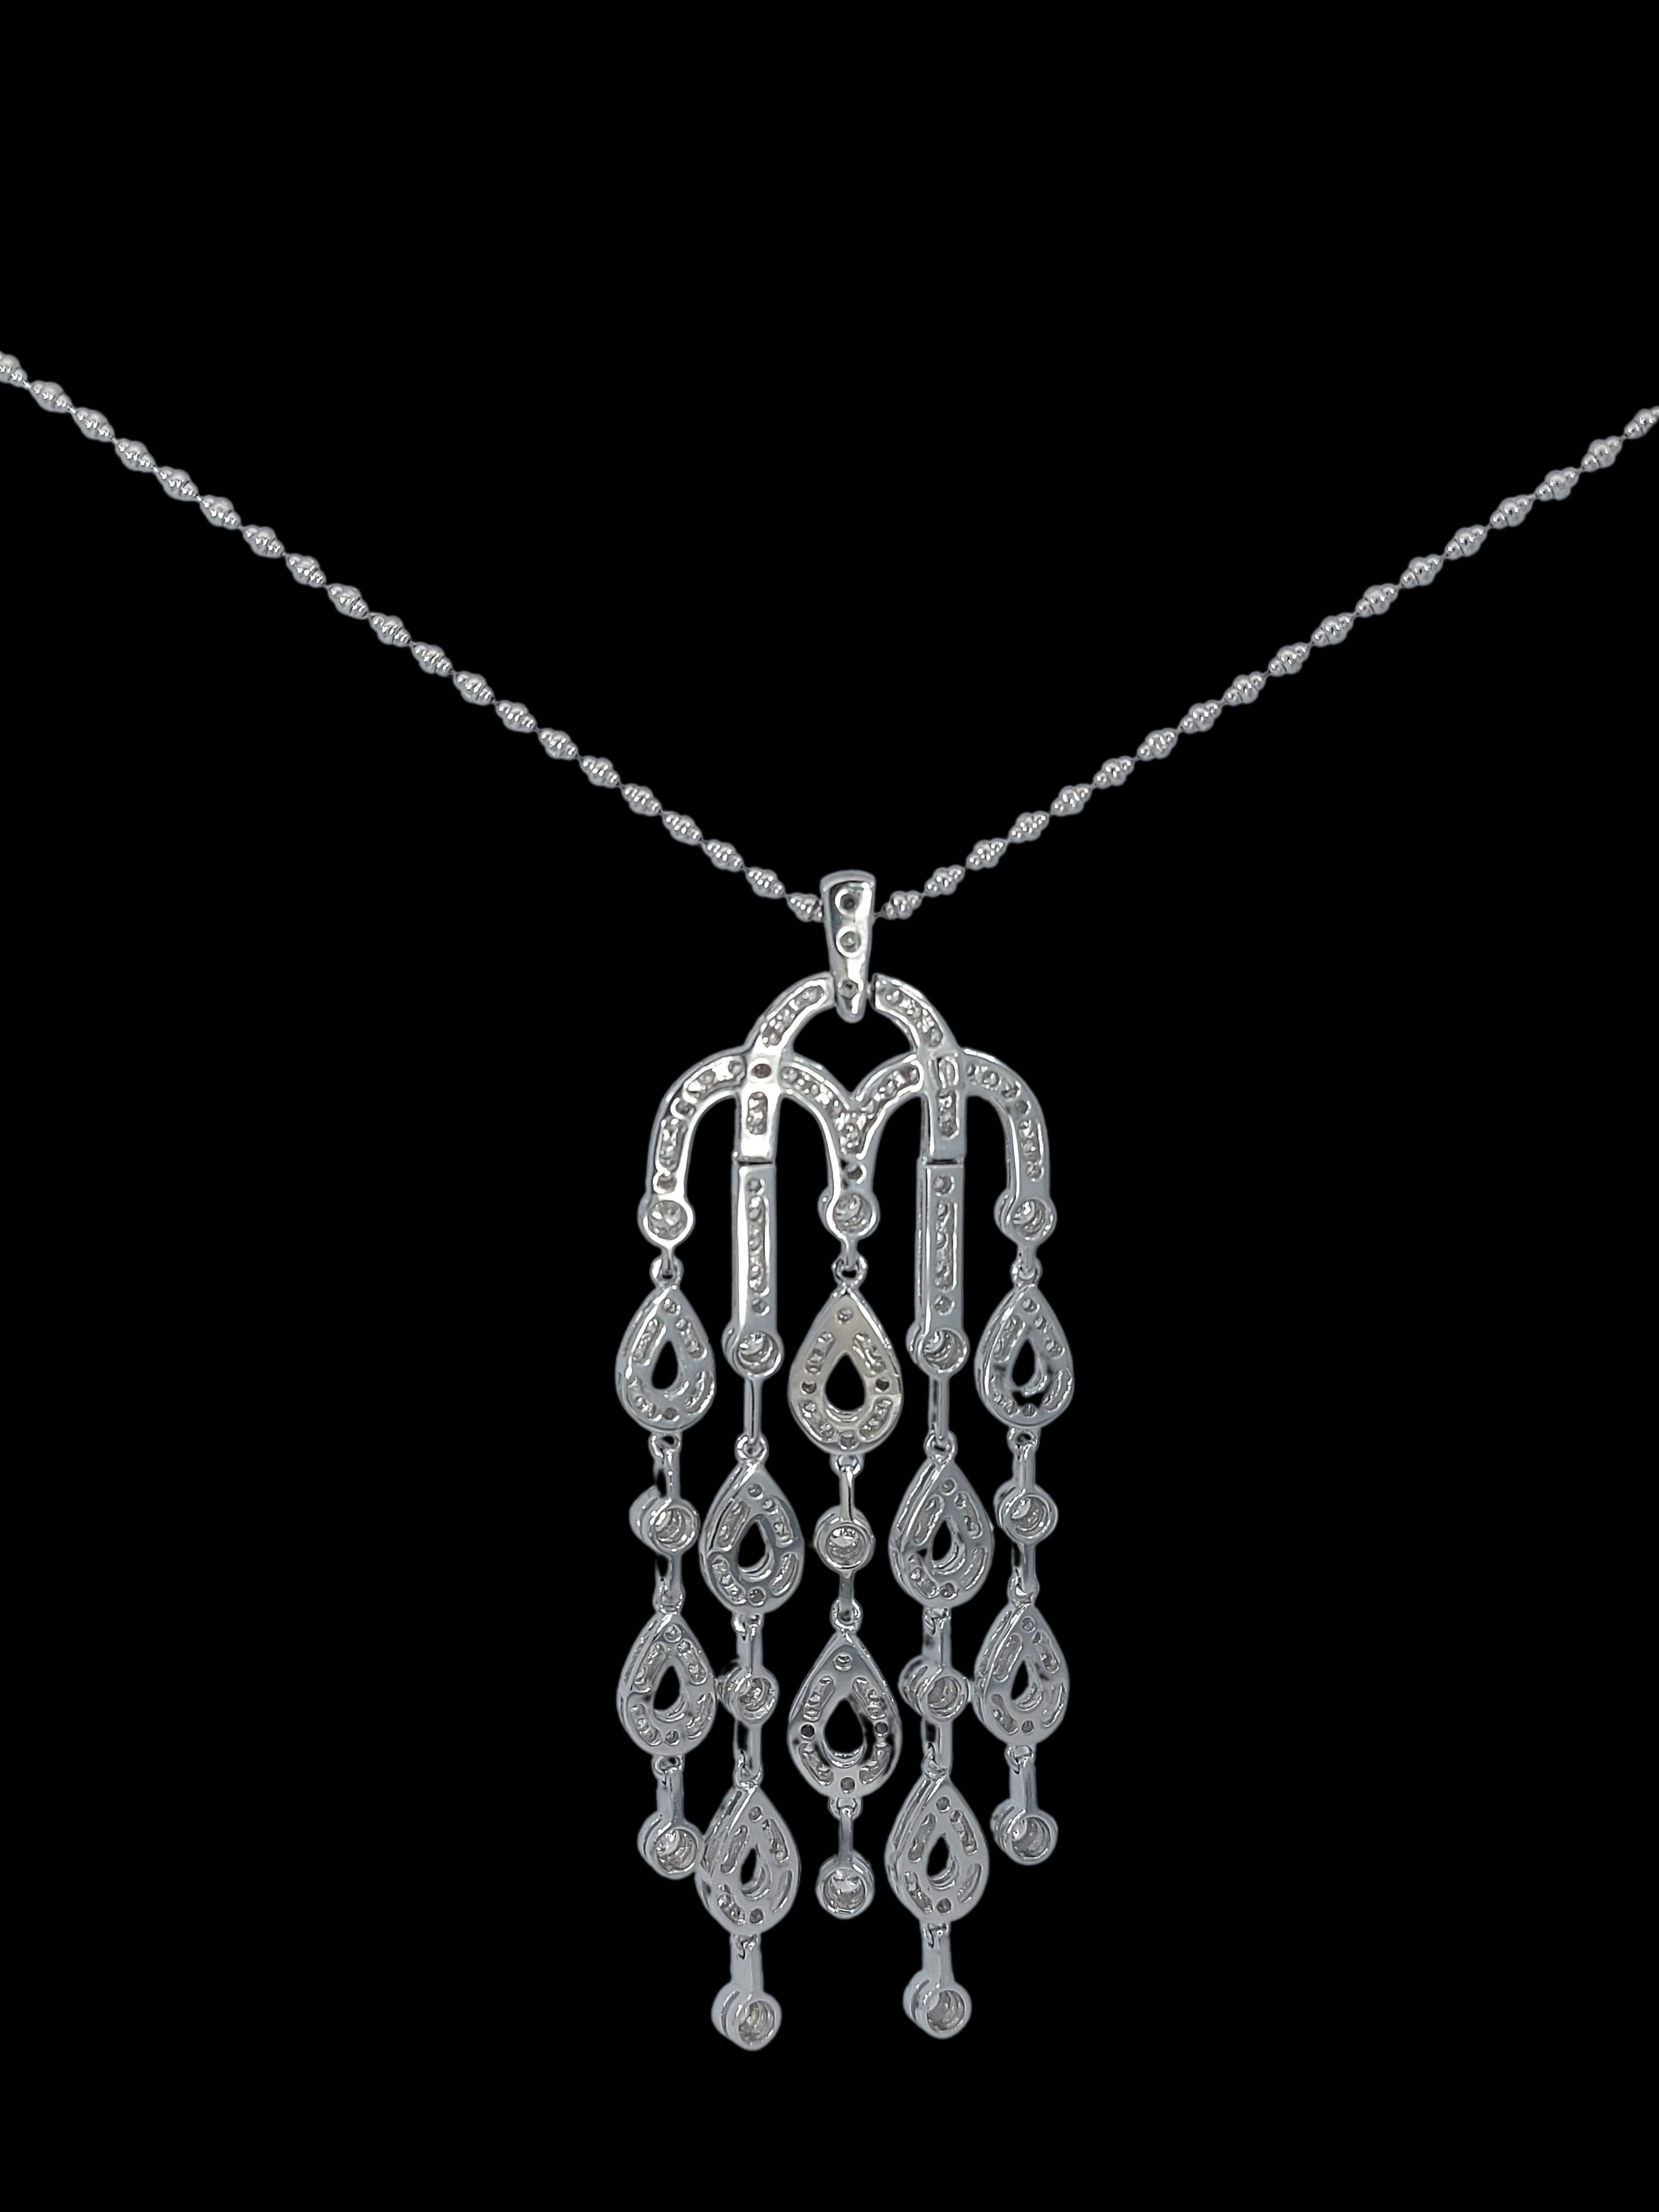 Dangling Chandelier 18kt White Gold Necklace with 5.4ct Diamonds For Sale 8